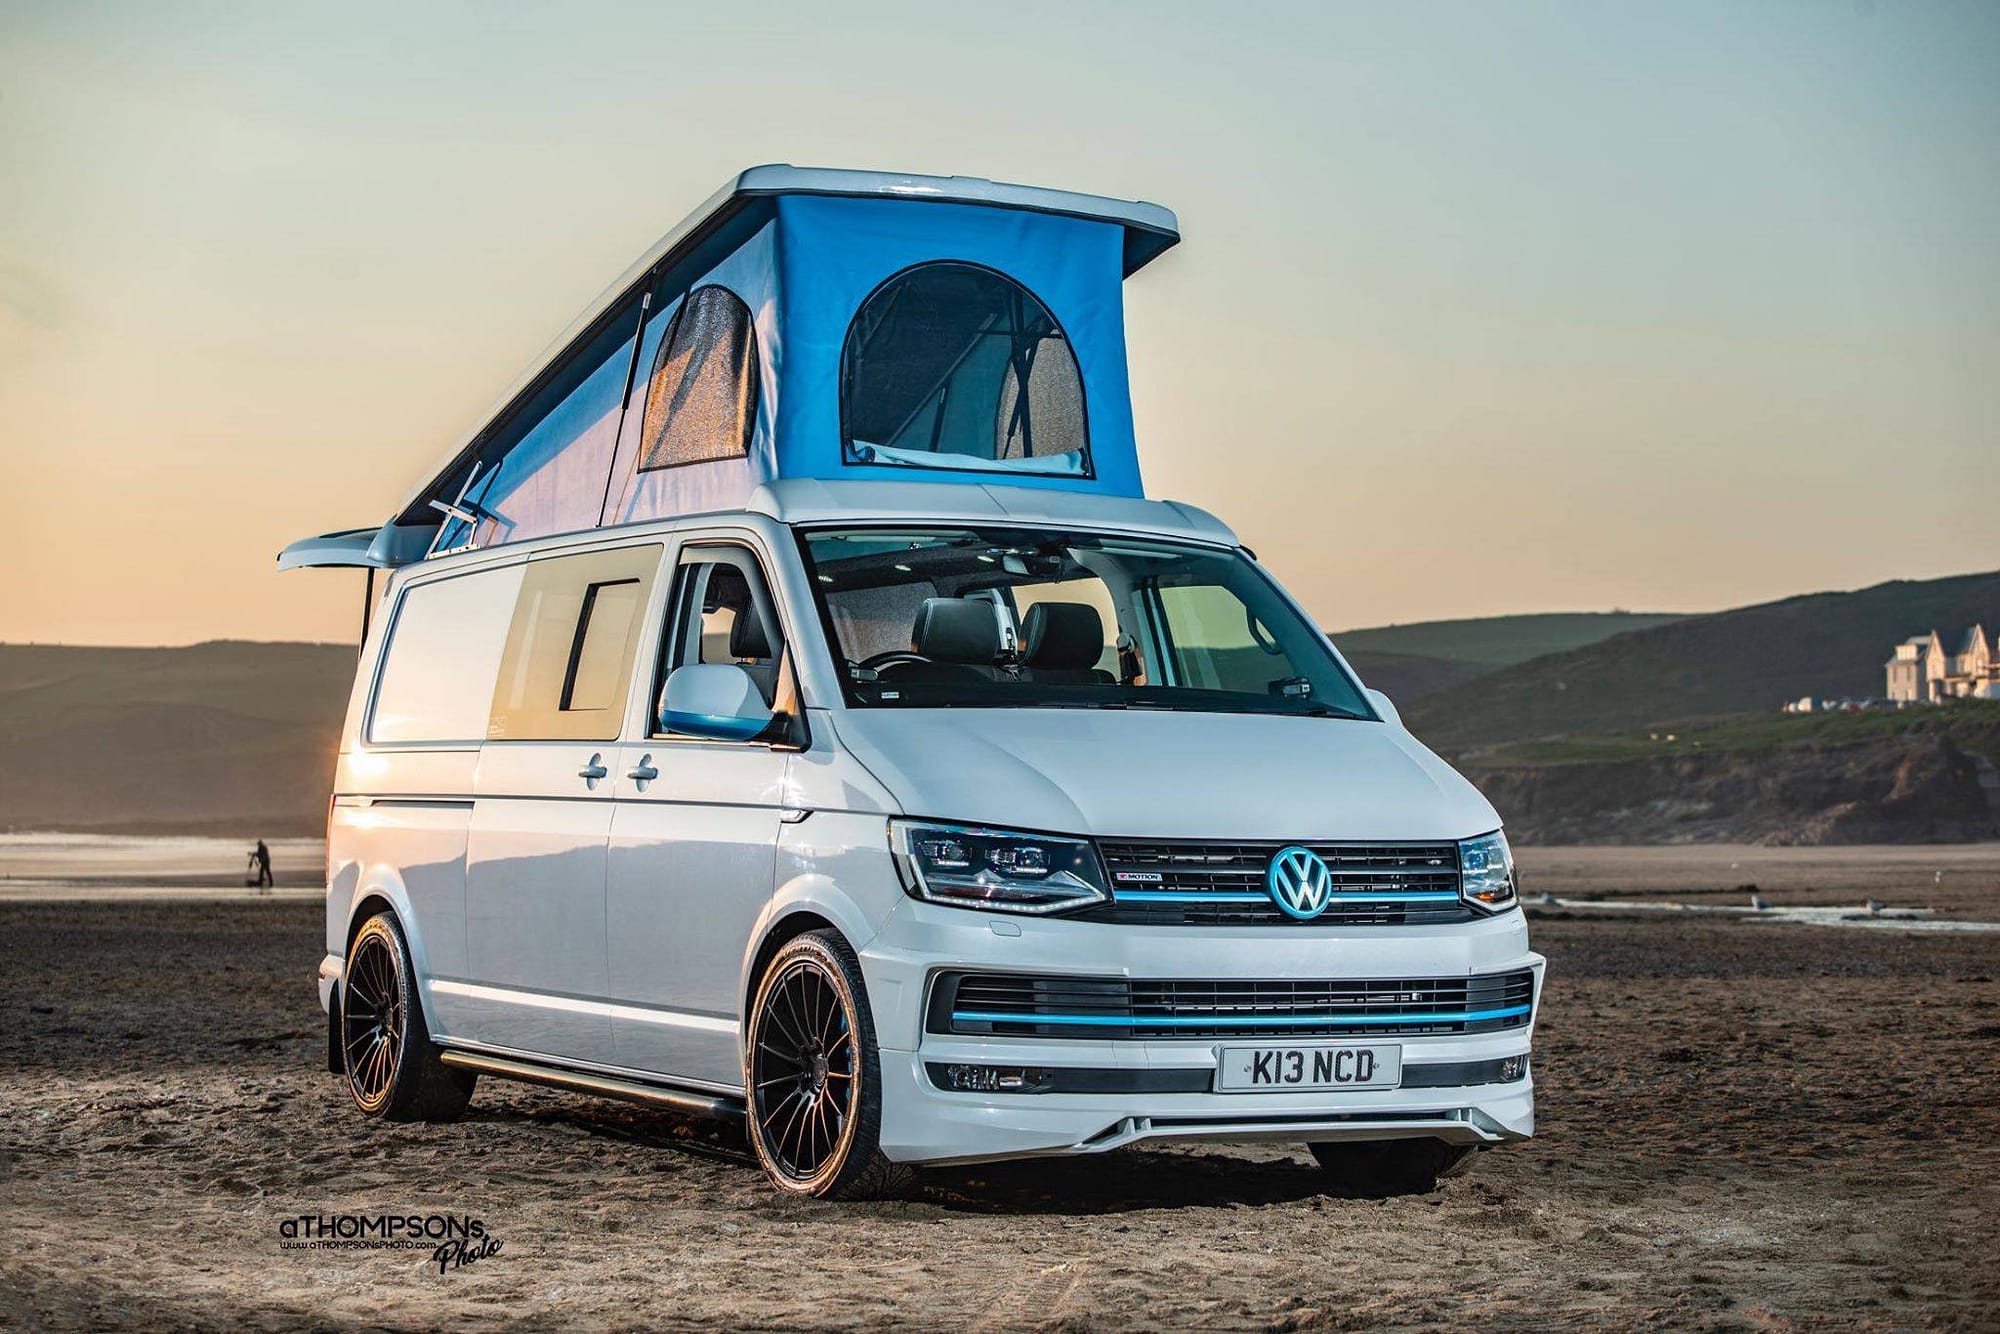 Cosmic Campervans is a culmination of years of experience, expertise and knowledge in the Campervan Conversion industry.